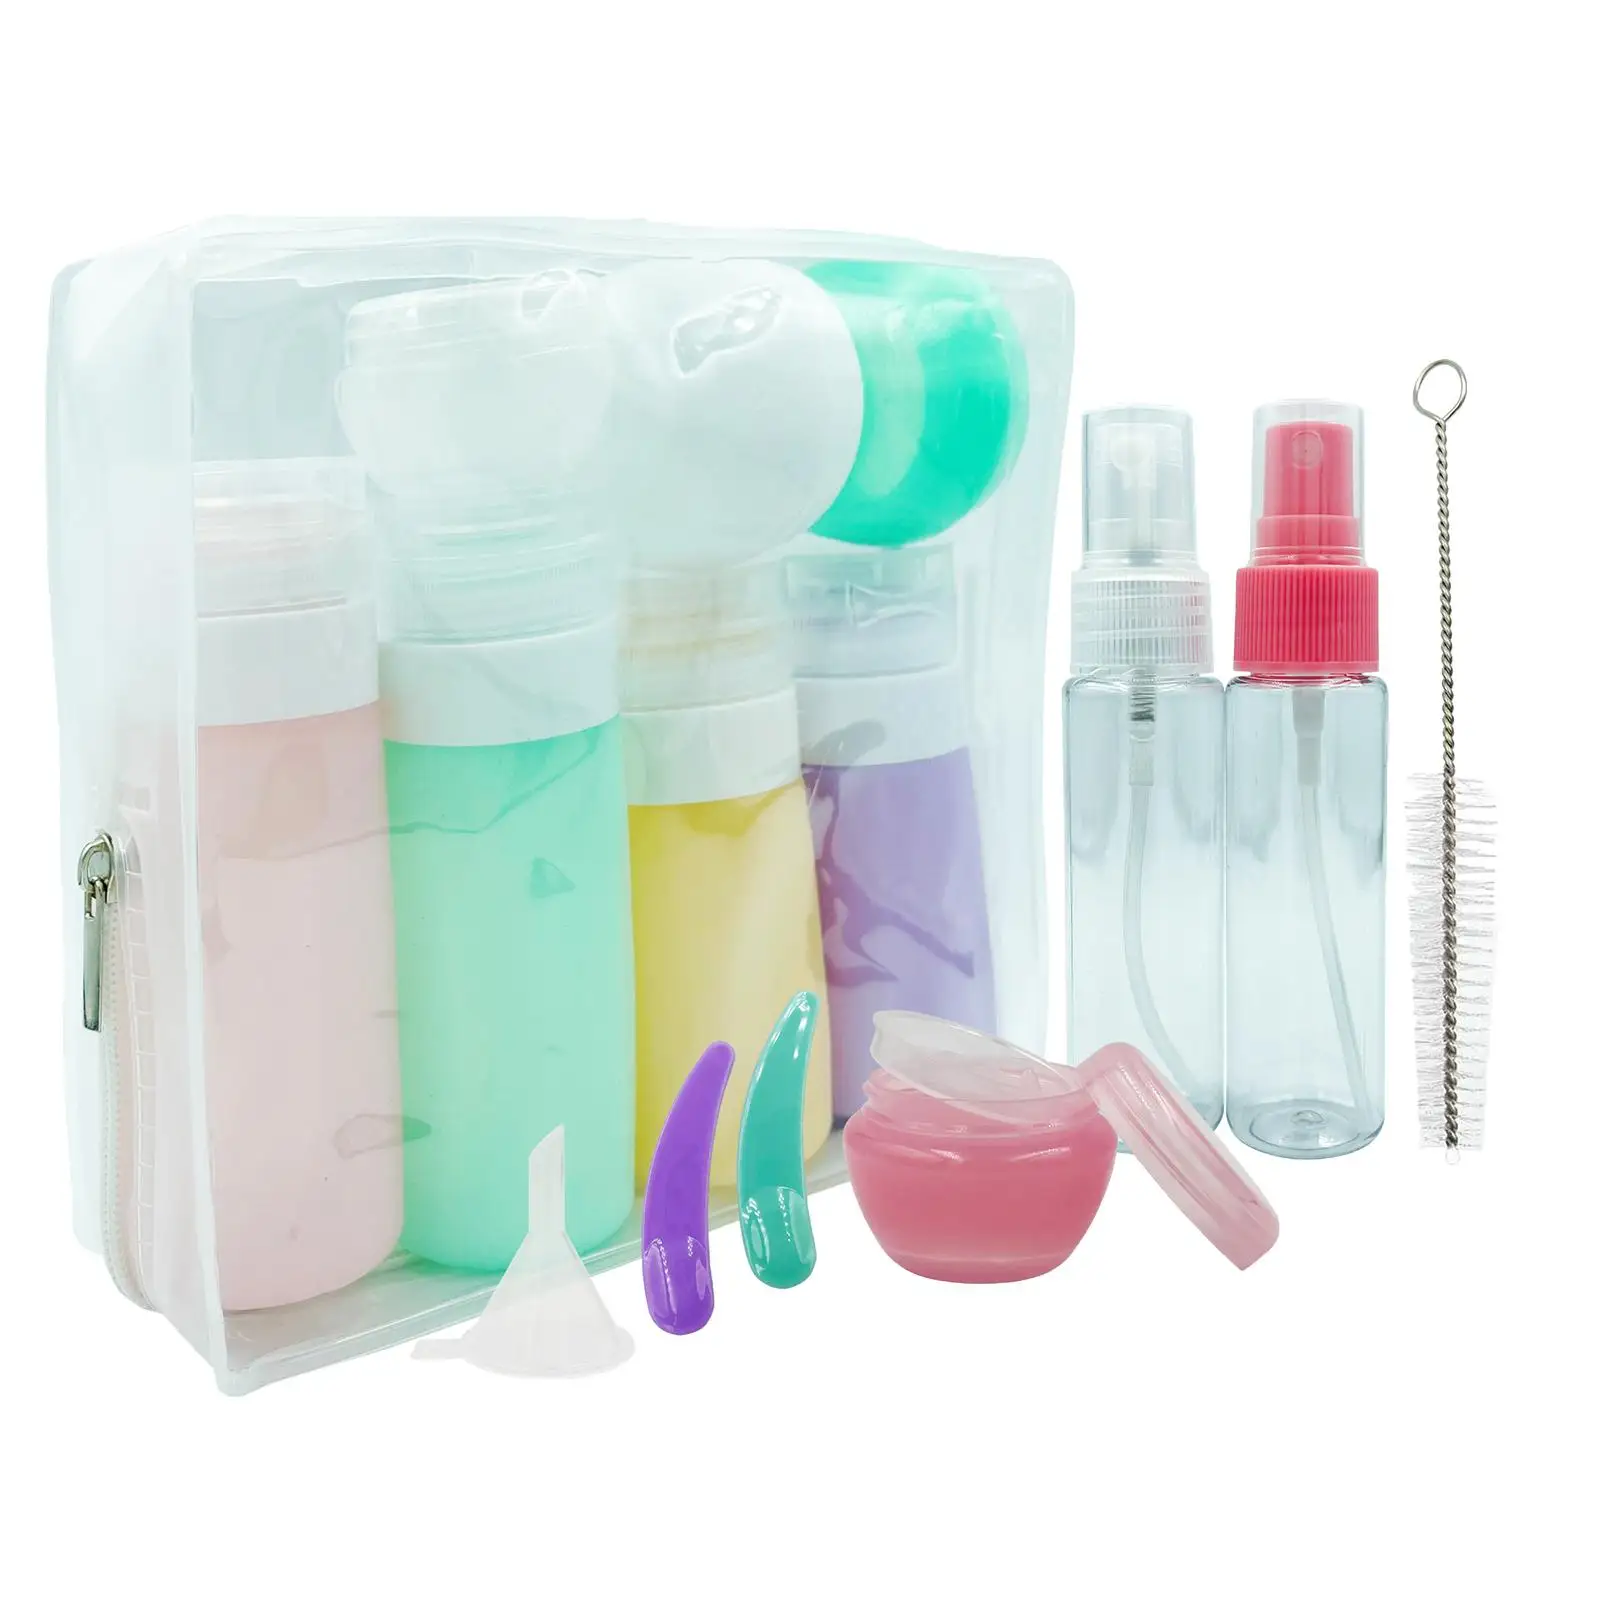 Portable Travel Bottles, Spray Pump Squeezable Travel Accessories Toiletries Containers for Travel